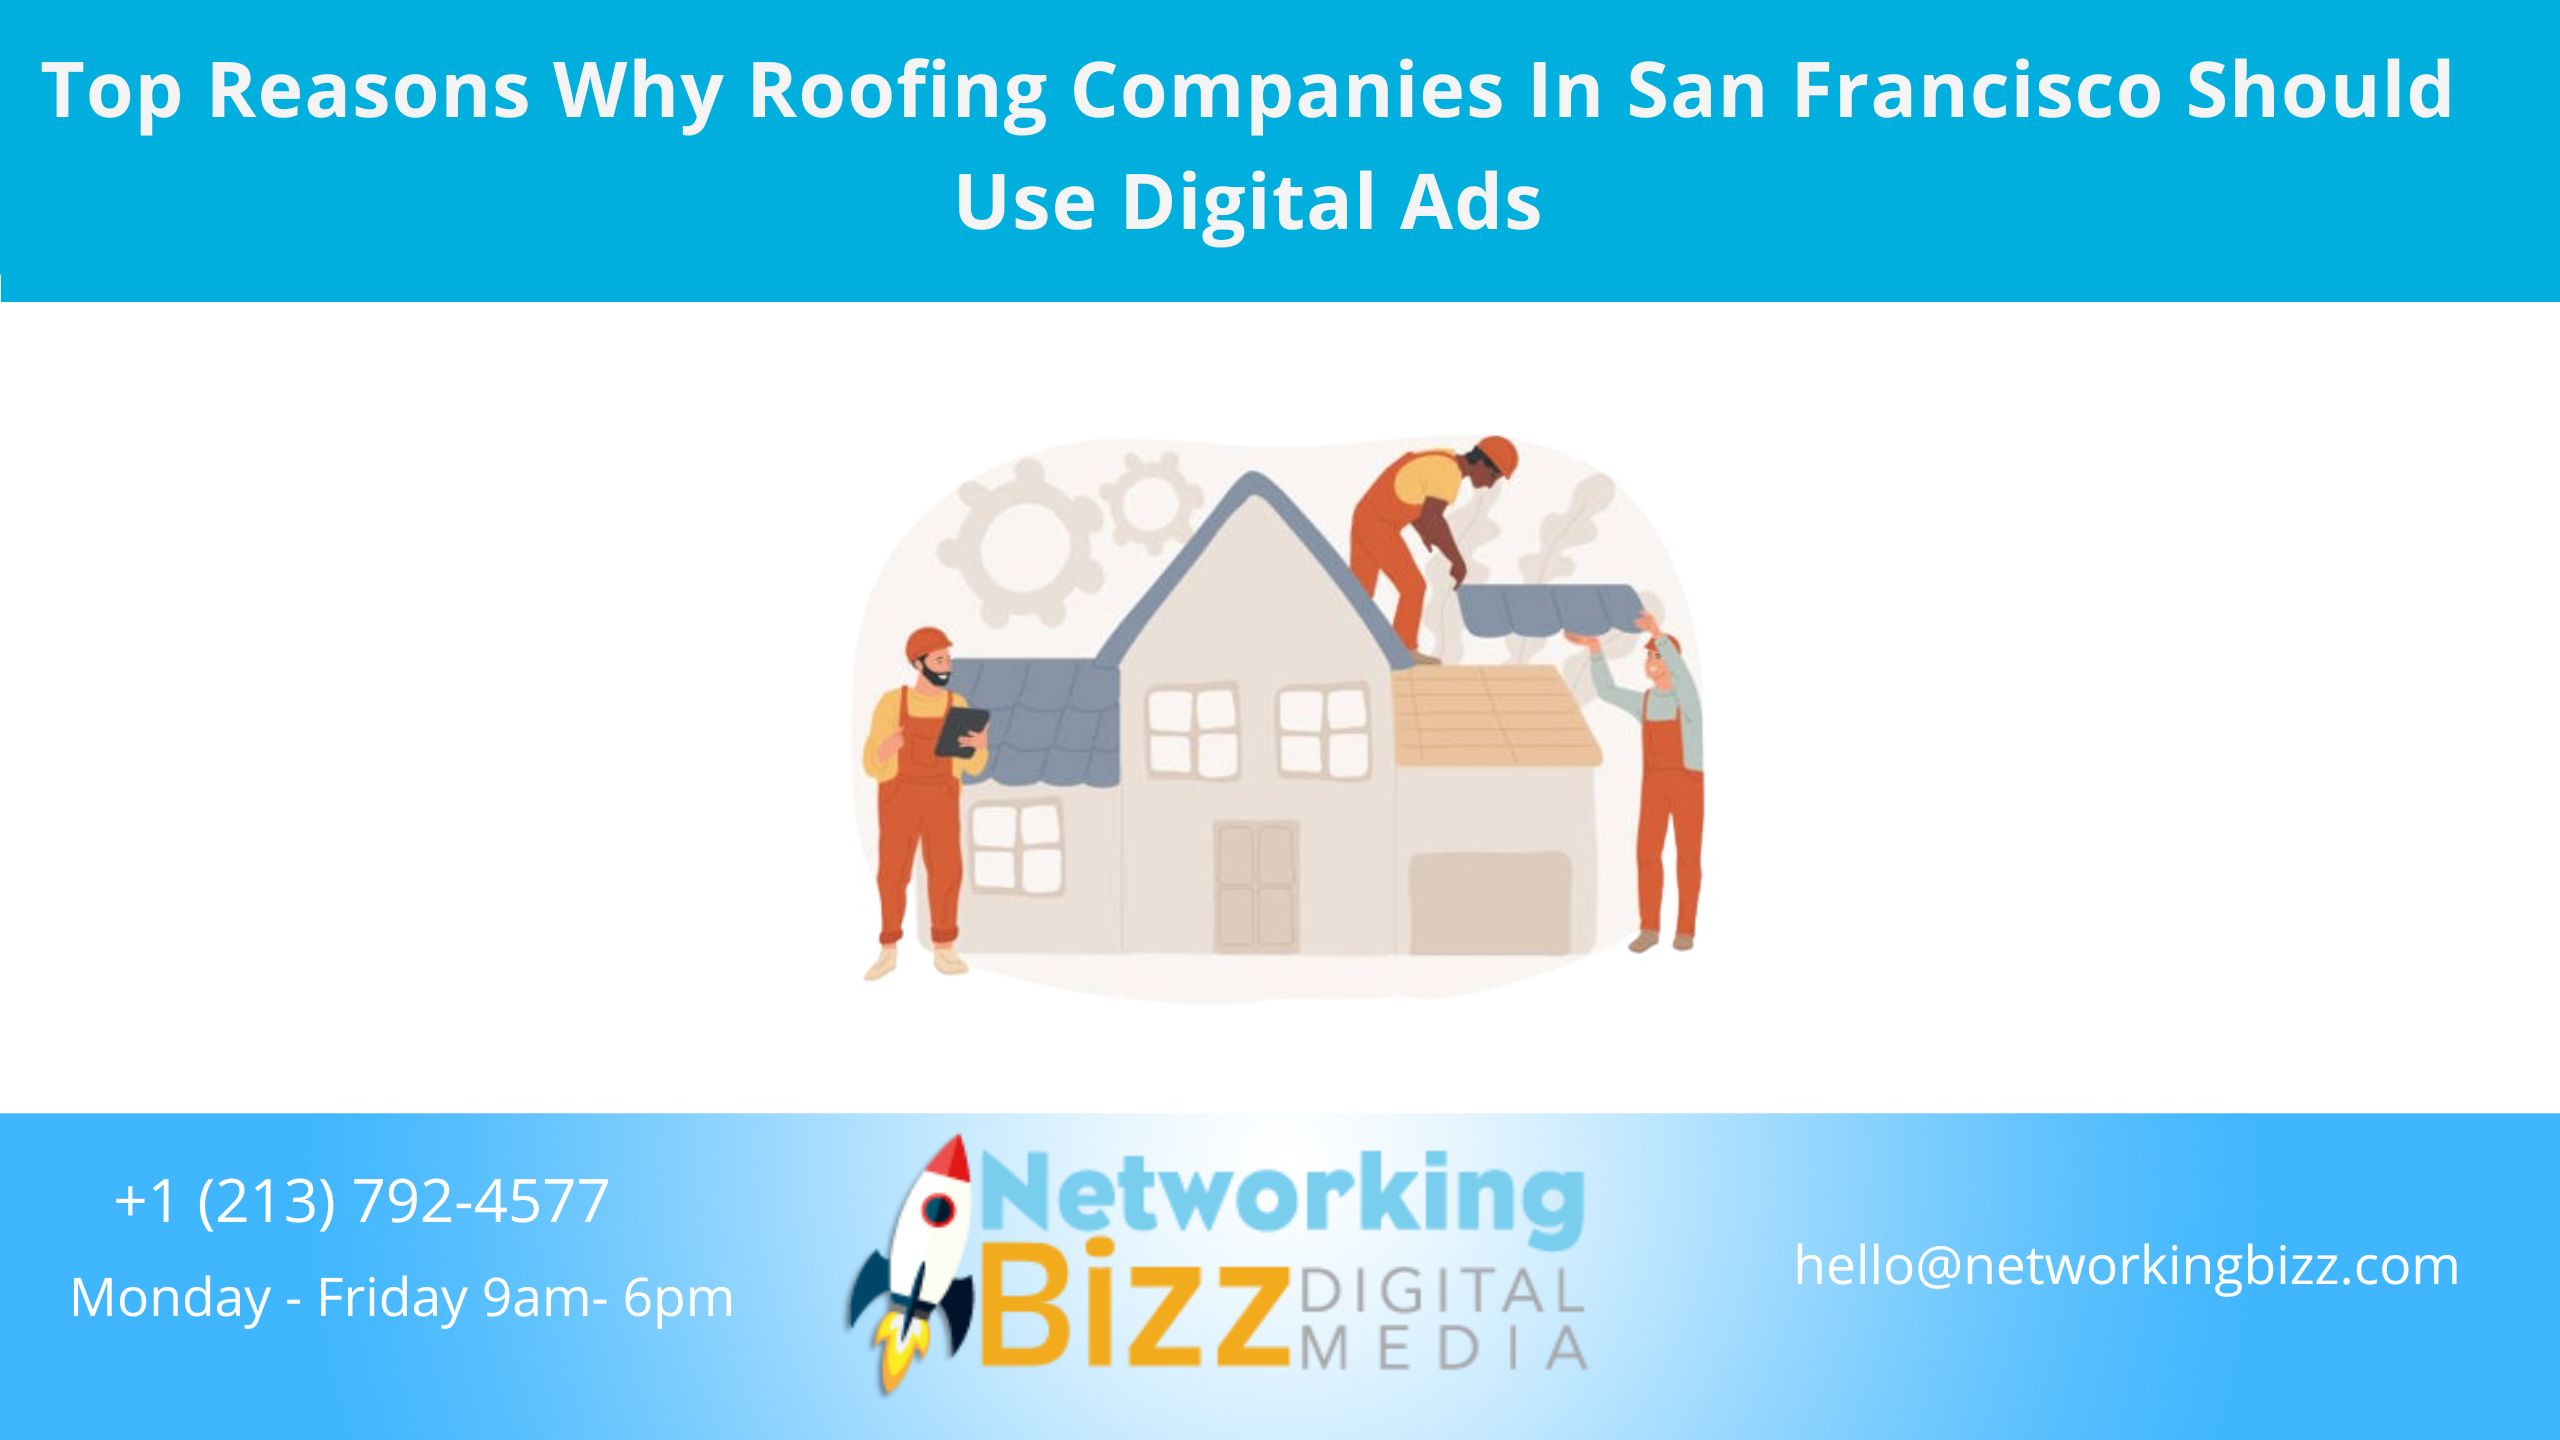 Top Reasons Why Roofing Companies In San Francisco Should Use Digital Ads